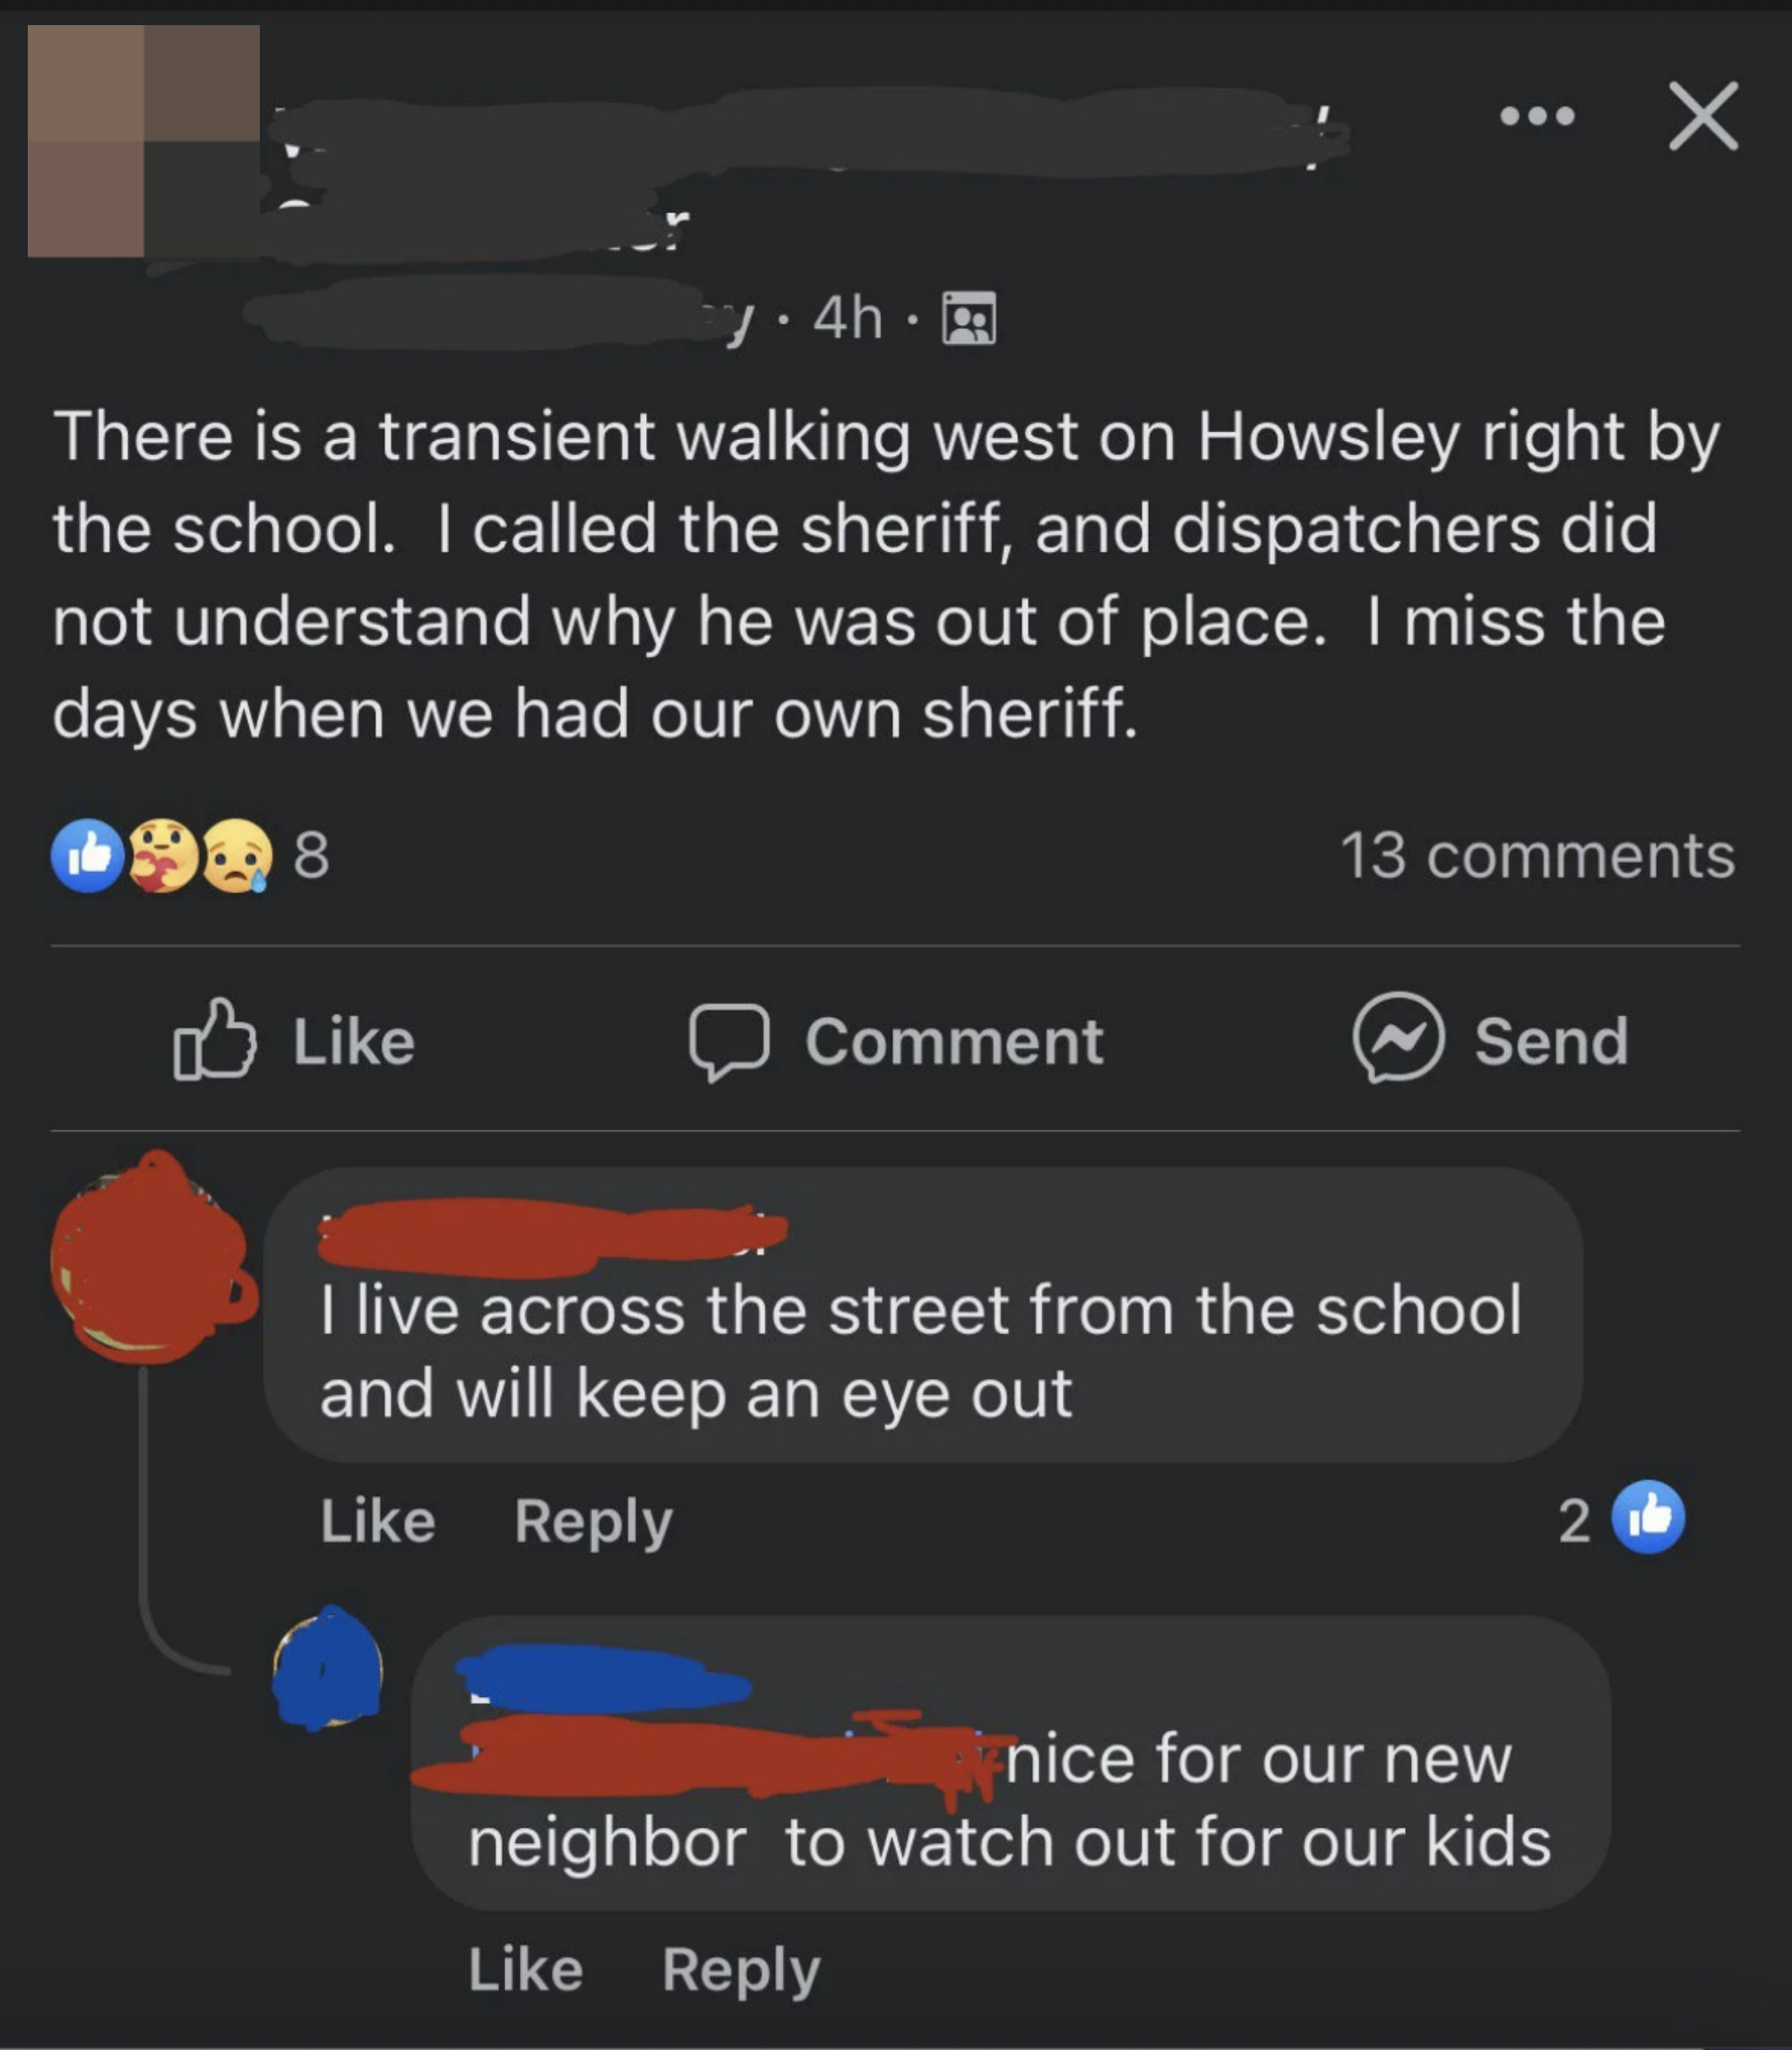 Person complains about a &quot;transient&quot; walking right by a school and calls the sheriff, but dispatcher didn&#x27;t know why he was out of place